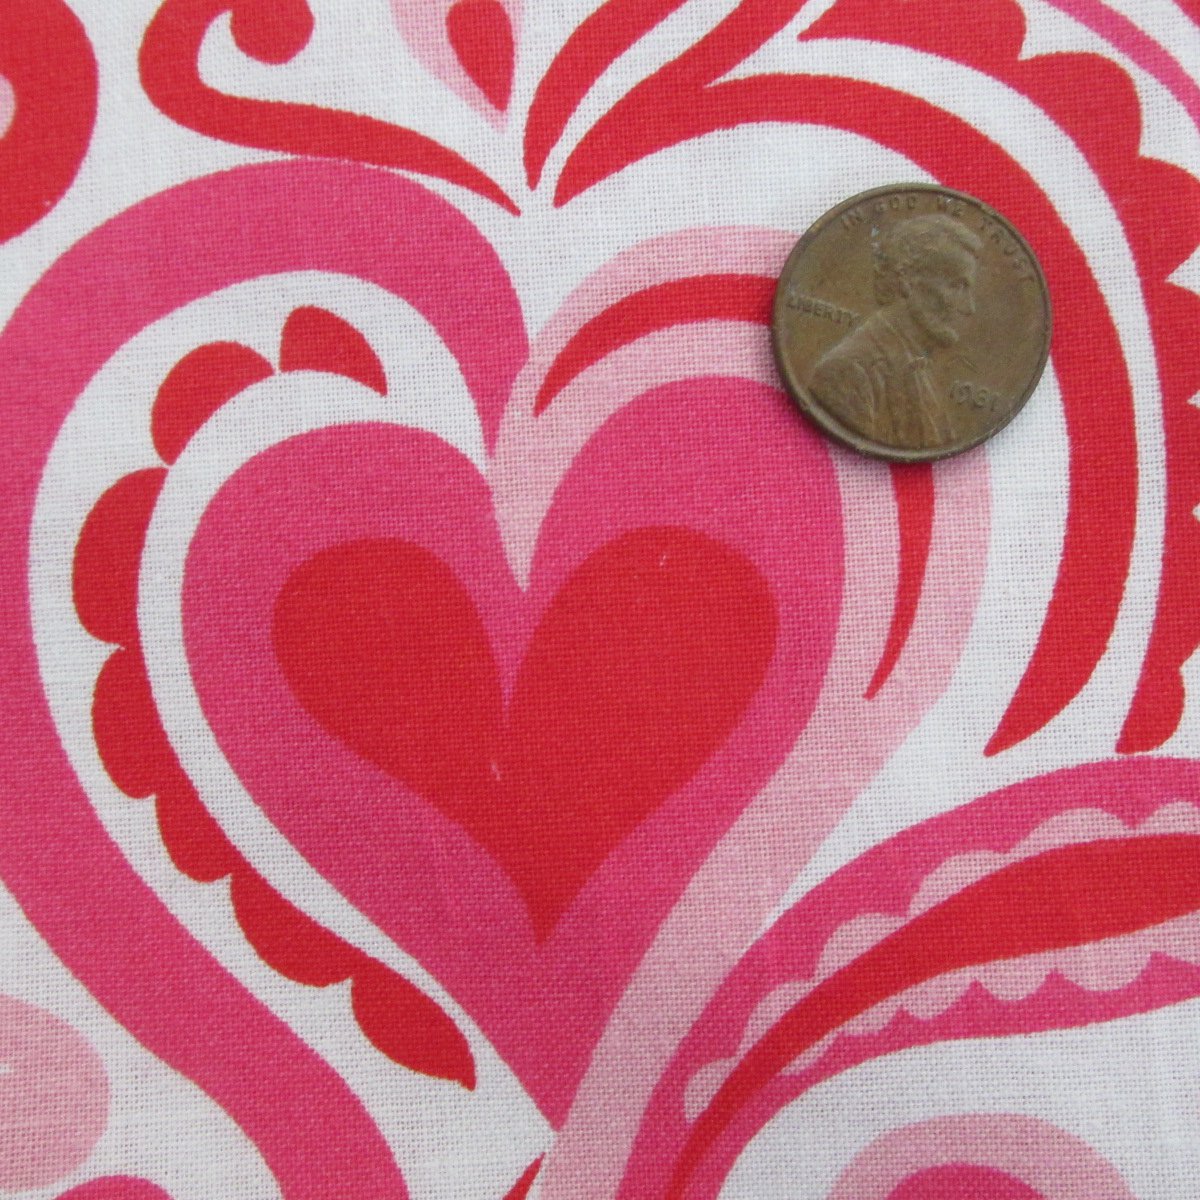 VALENTINE RED HEARTS W/ PAISLEY PRINT 100% COTTON FABRIC 43-44